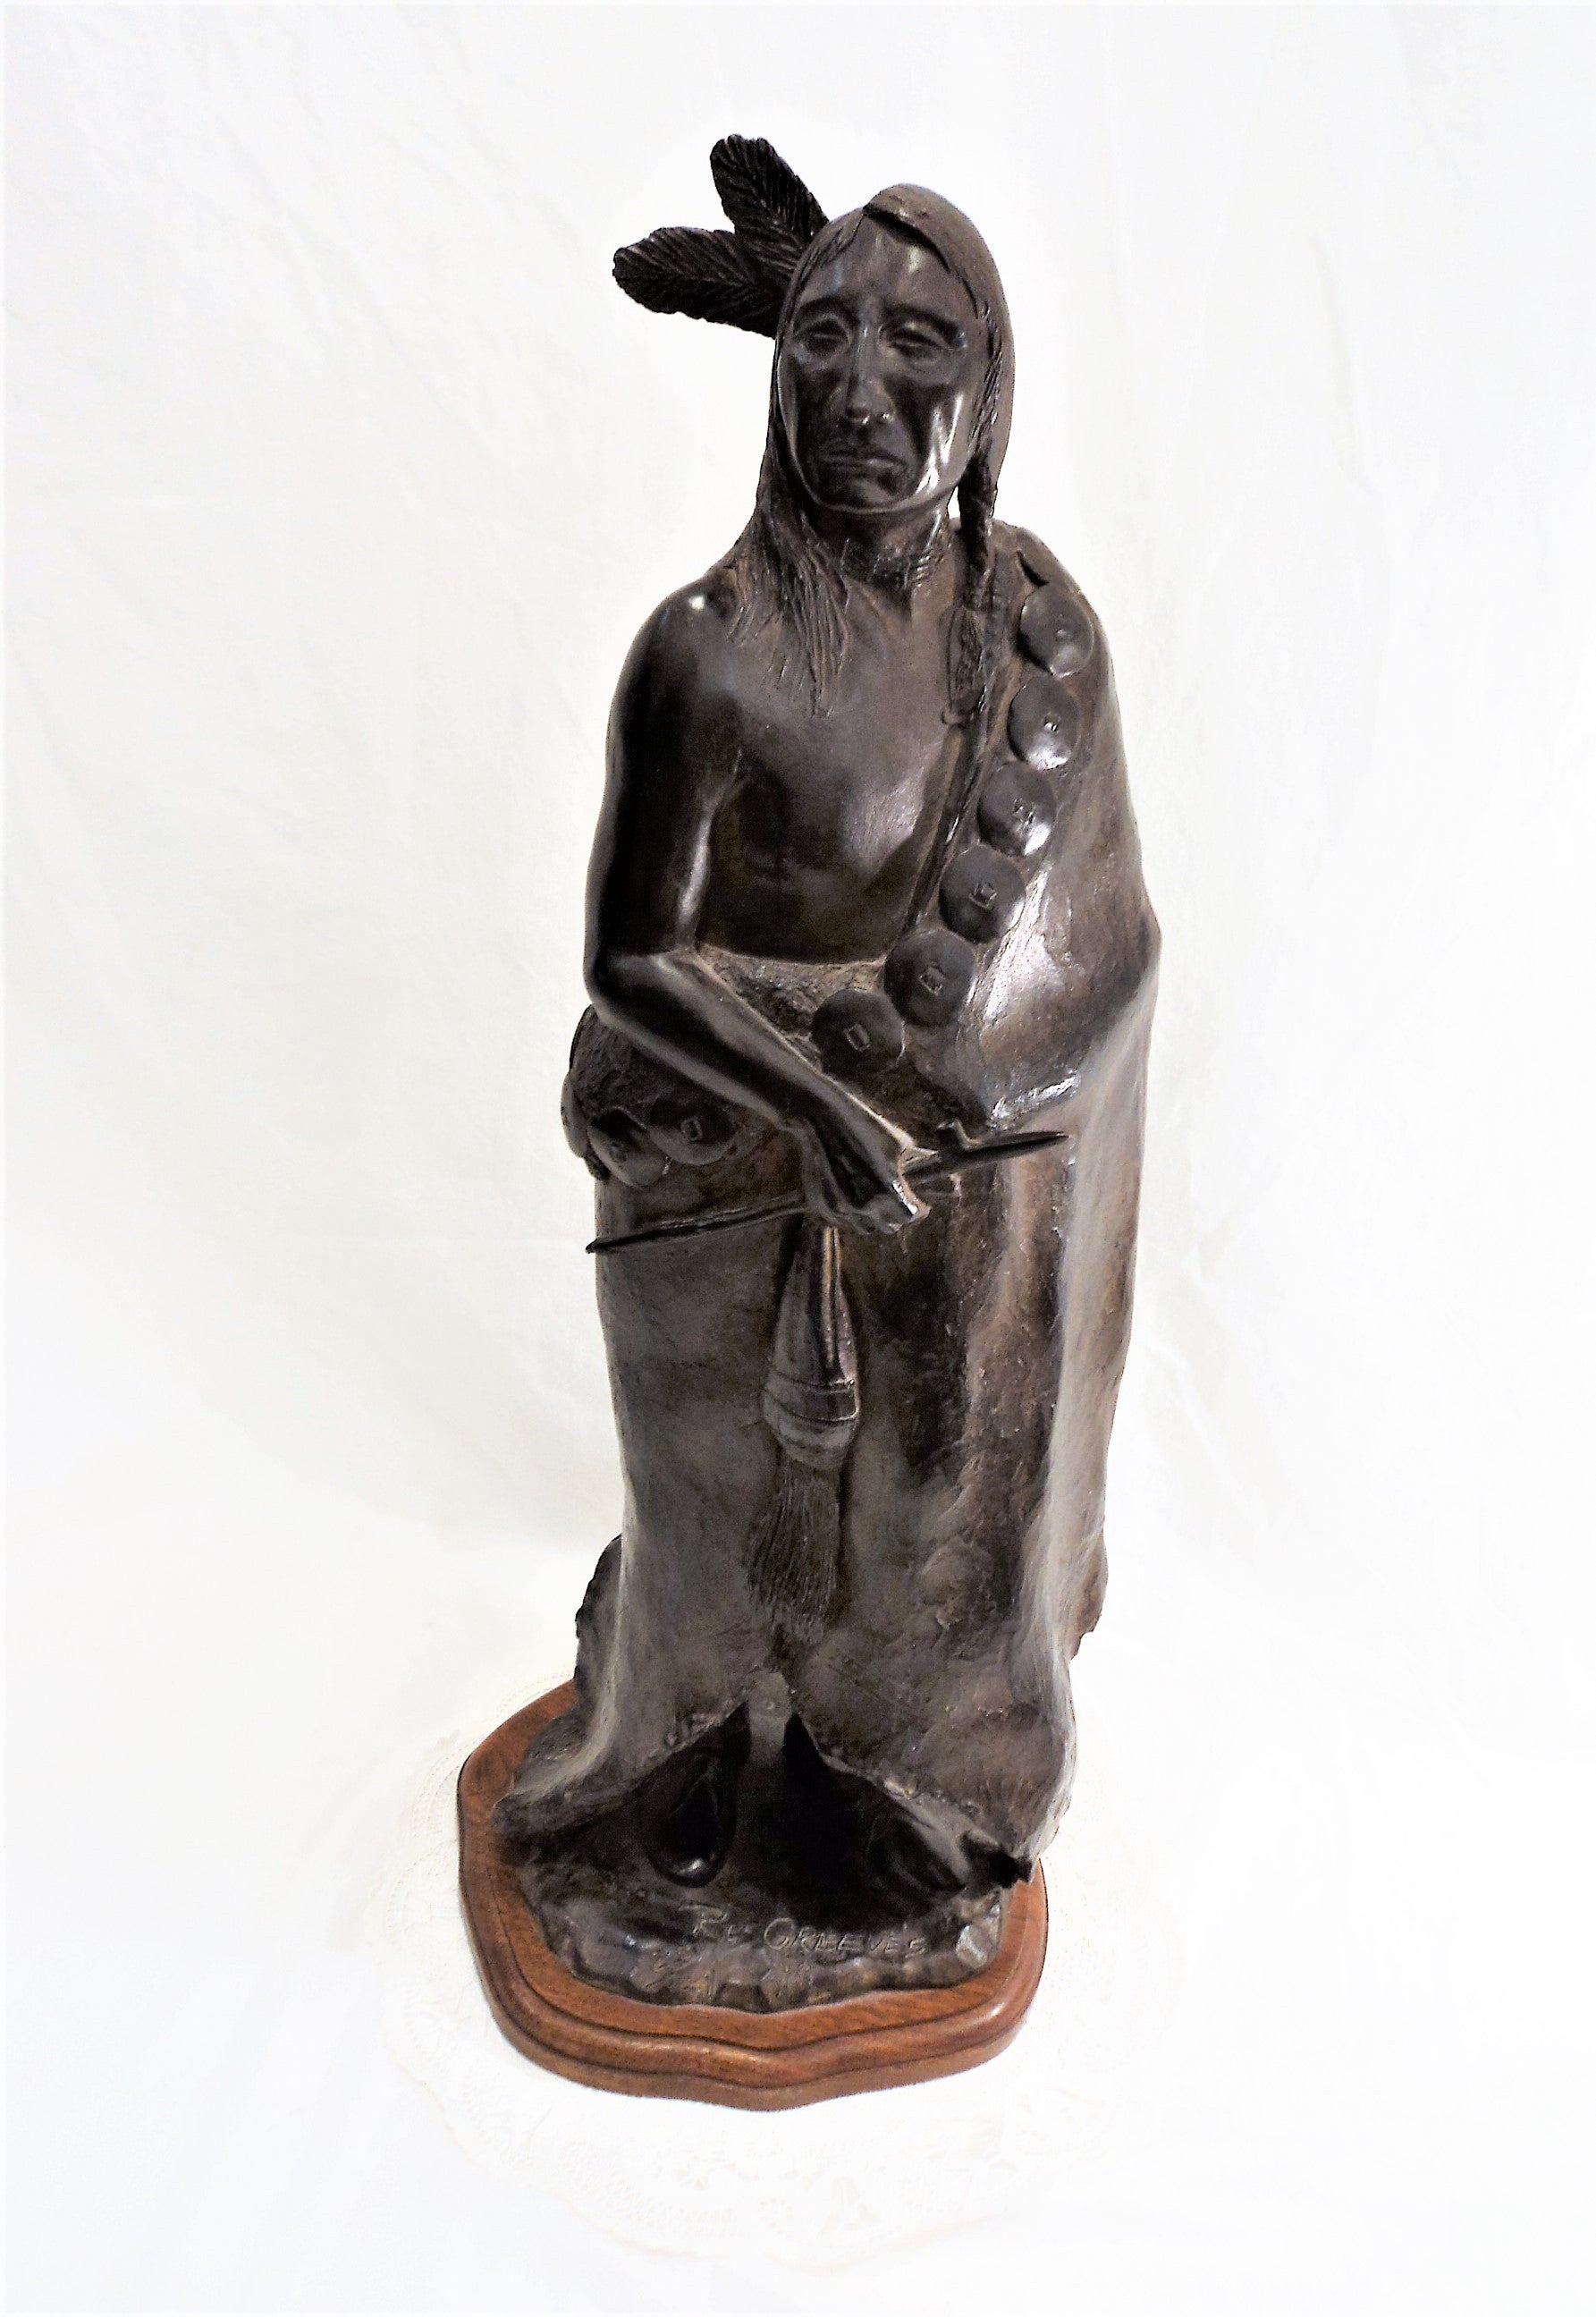 Signed Limited Edition Bronze Sculpture 